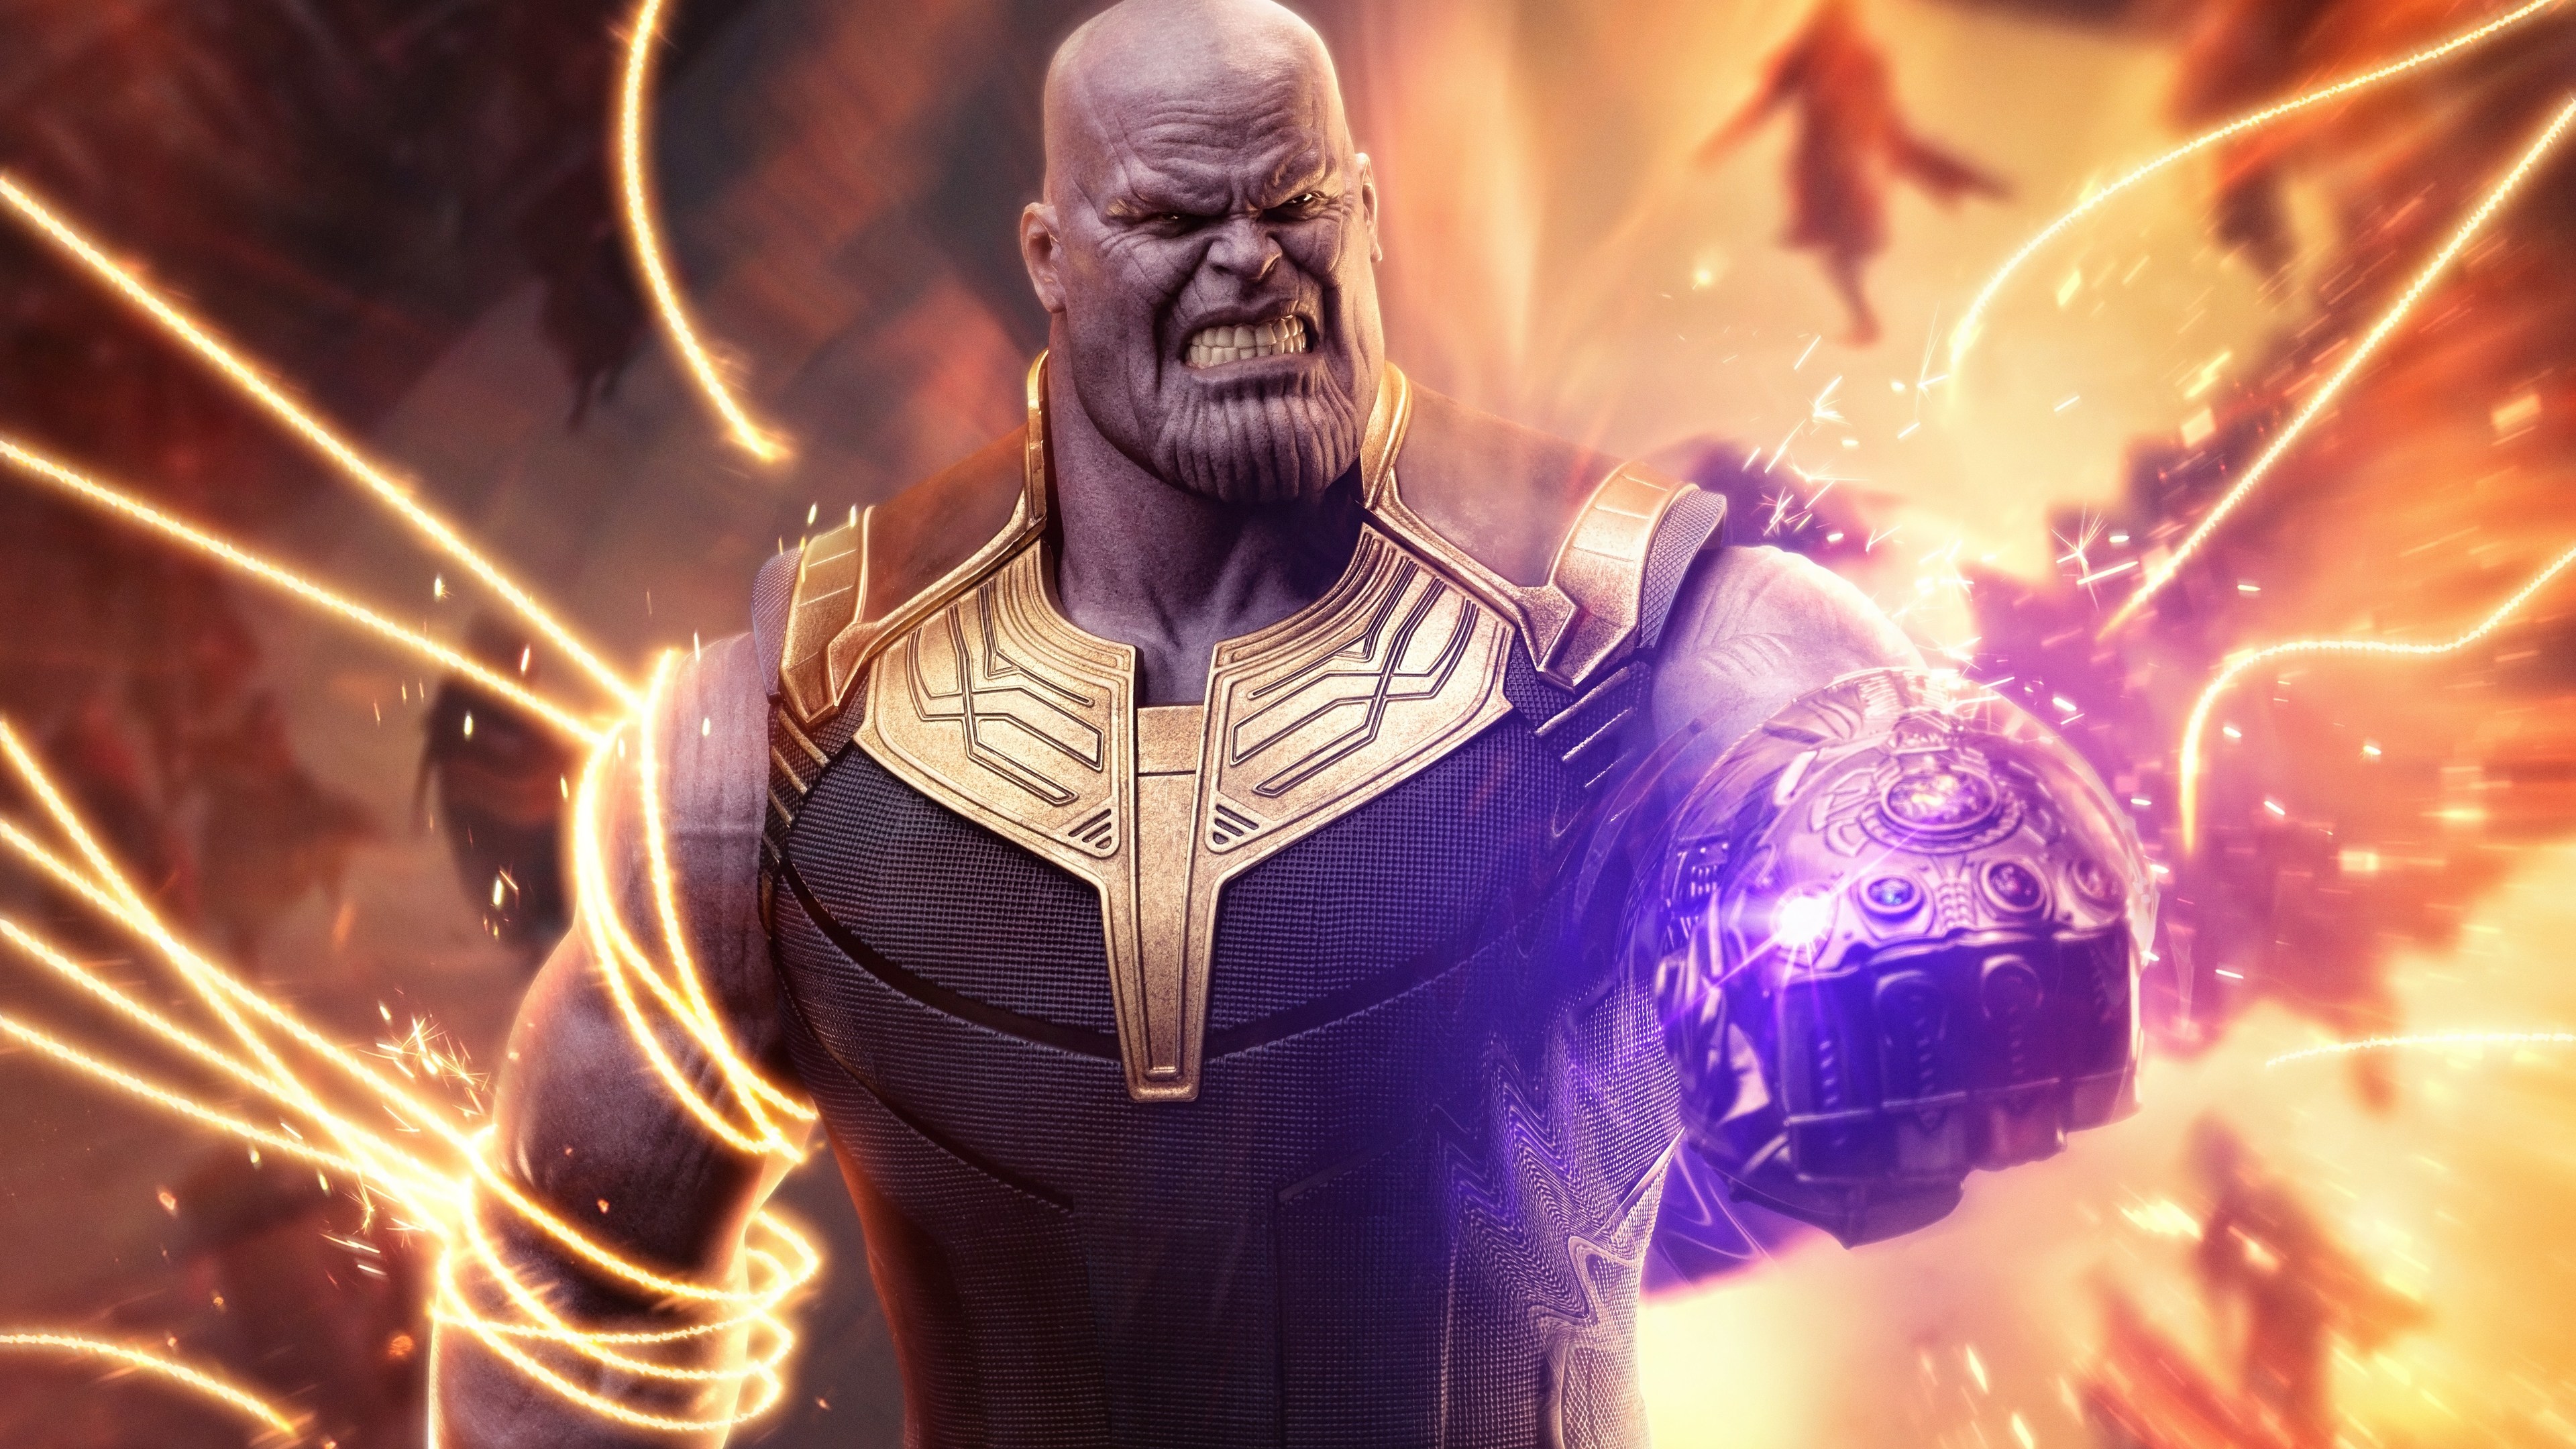  Thanos  Infinity Gauntlet 4k  thanos  wallpapers  